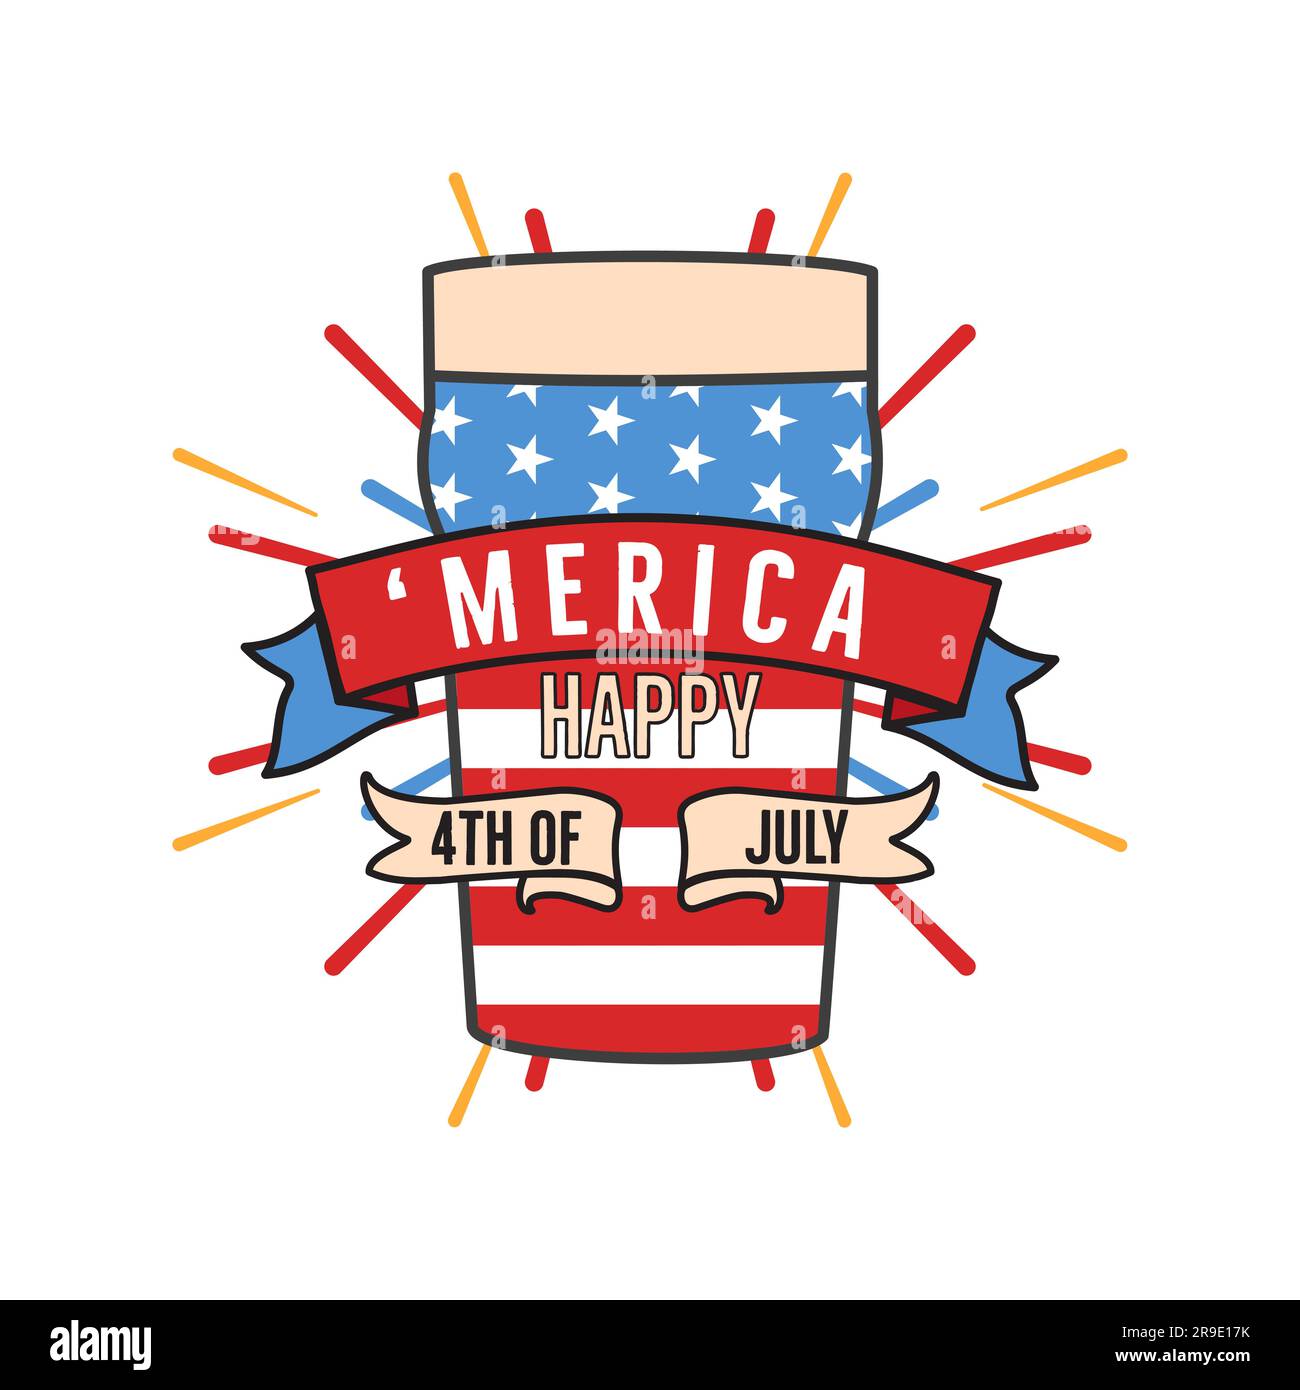 4th of July typography design with quote - Merica and beer. US Independence Day clipart. Fourth of July calligraphy, lettering composition. Vector emb Stock Vector